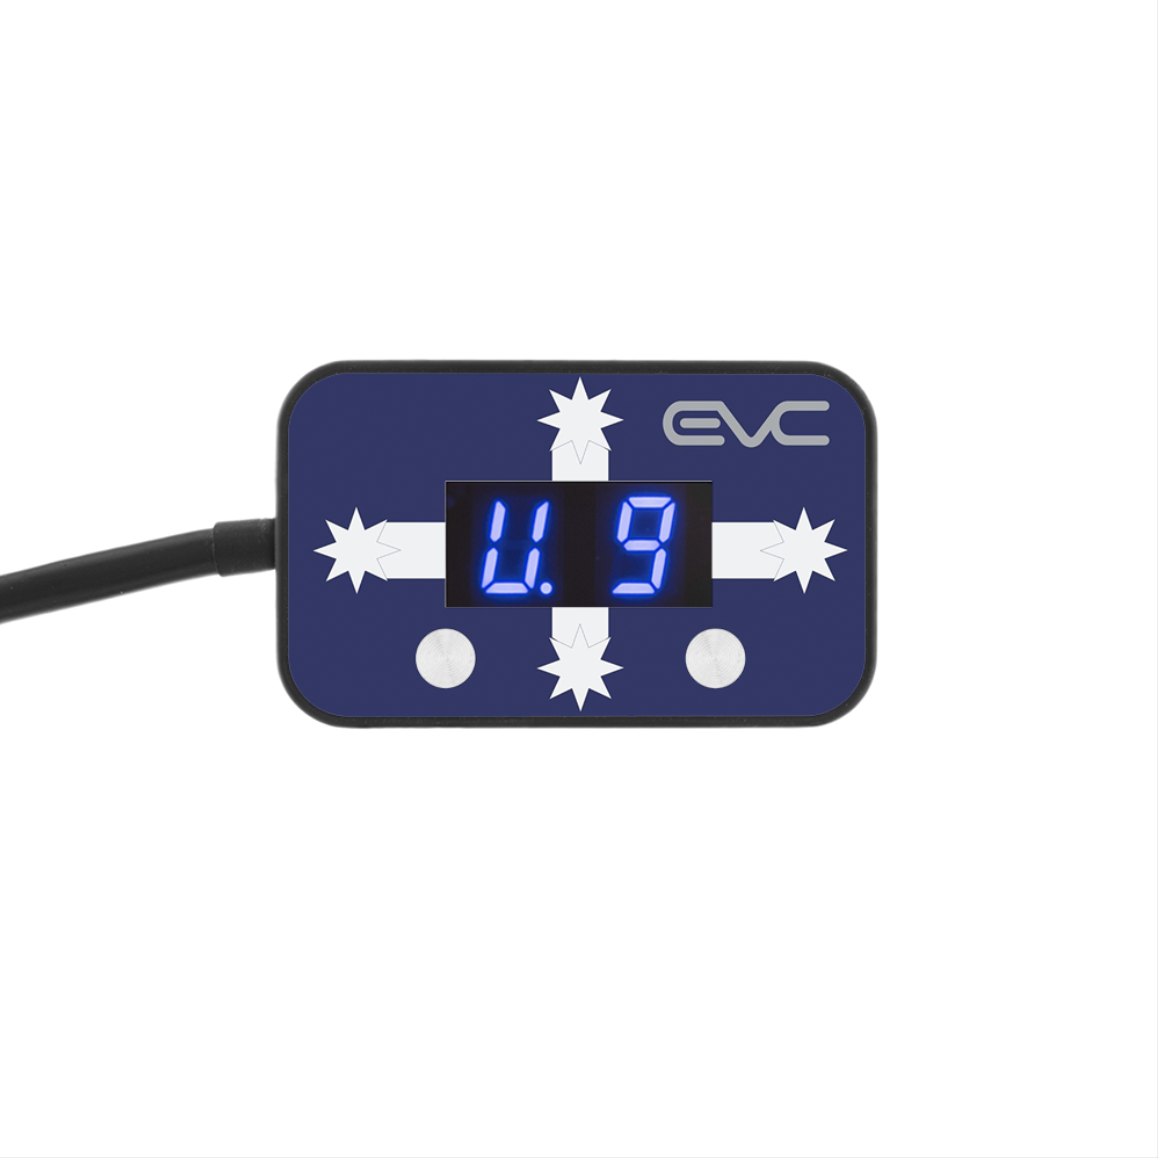 EVC iDrive Throttle Controller Eureka for Bmw All Series 2000-On EVC401